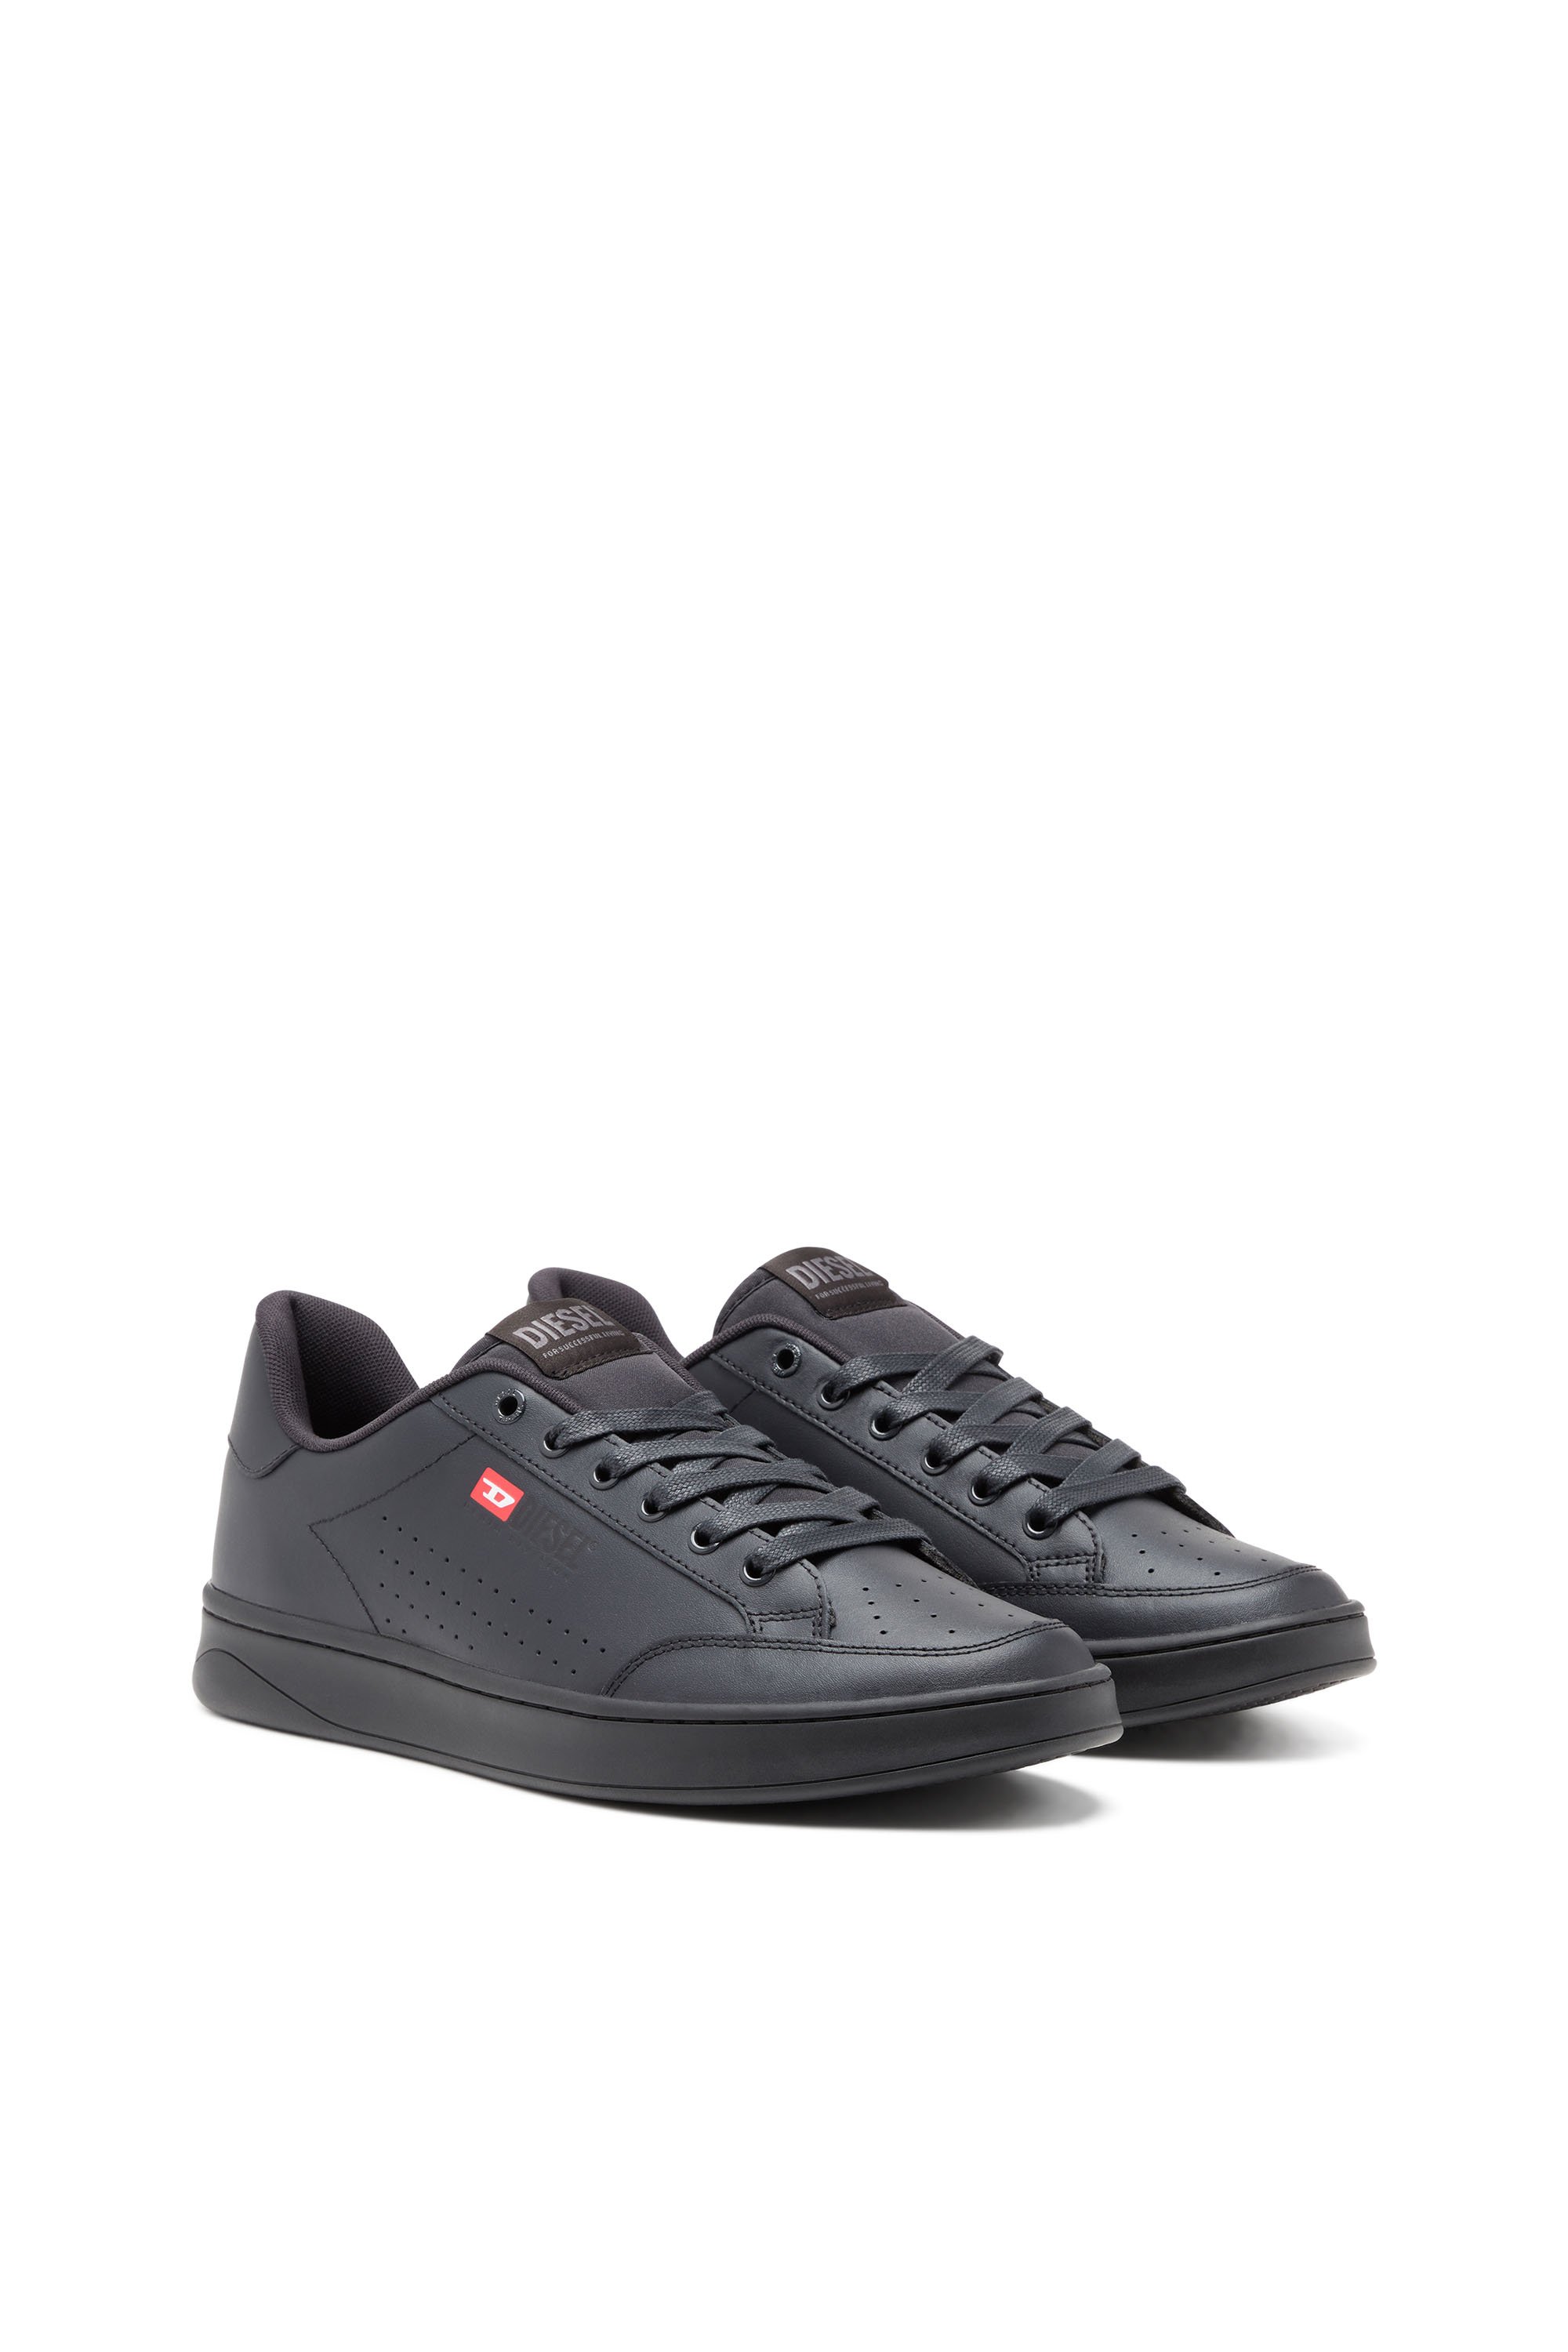 Diesel - S-ATHENE VTG, Man S-Athene-Low-top sneakers in leather and nylon in Black - Image 2